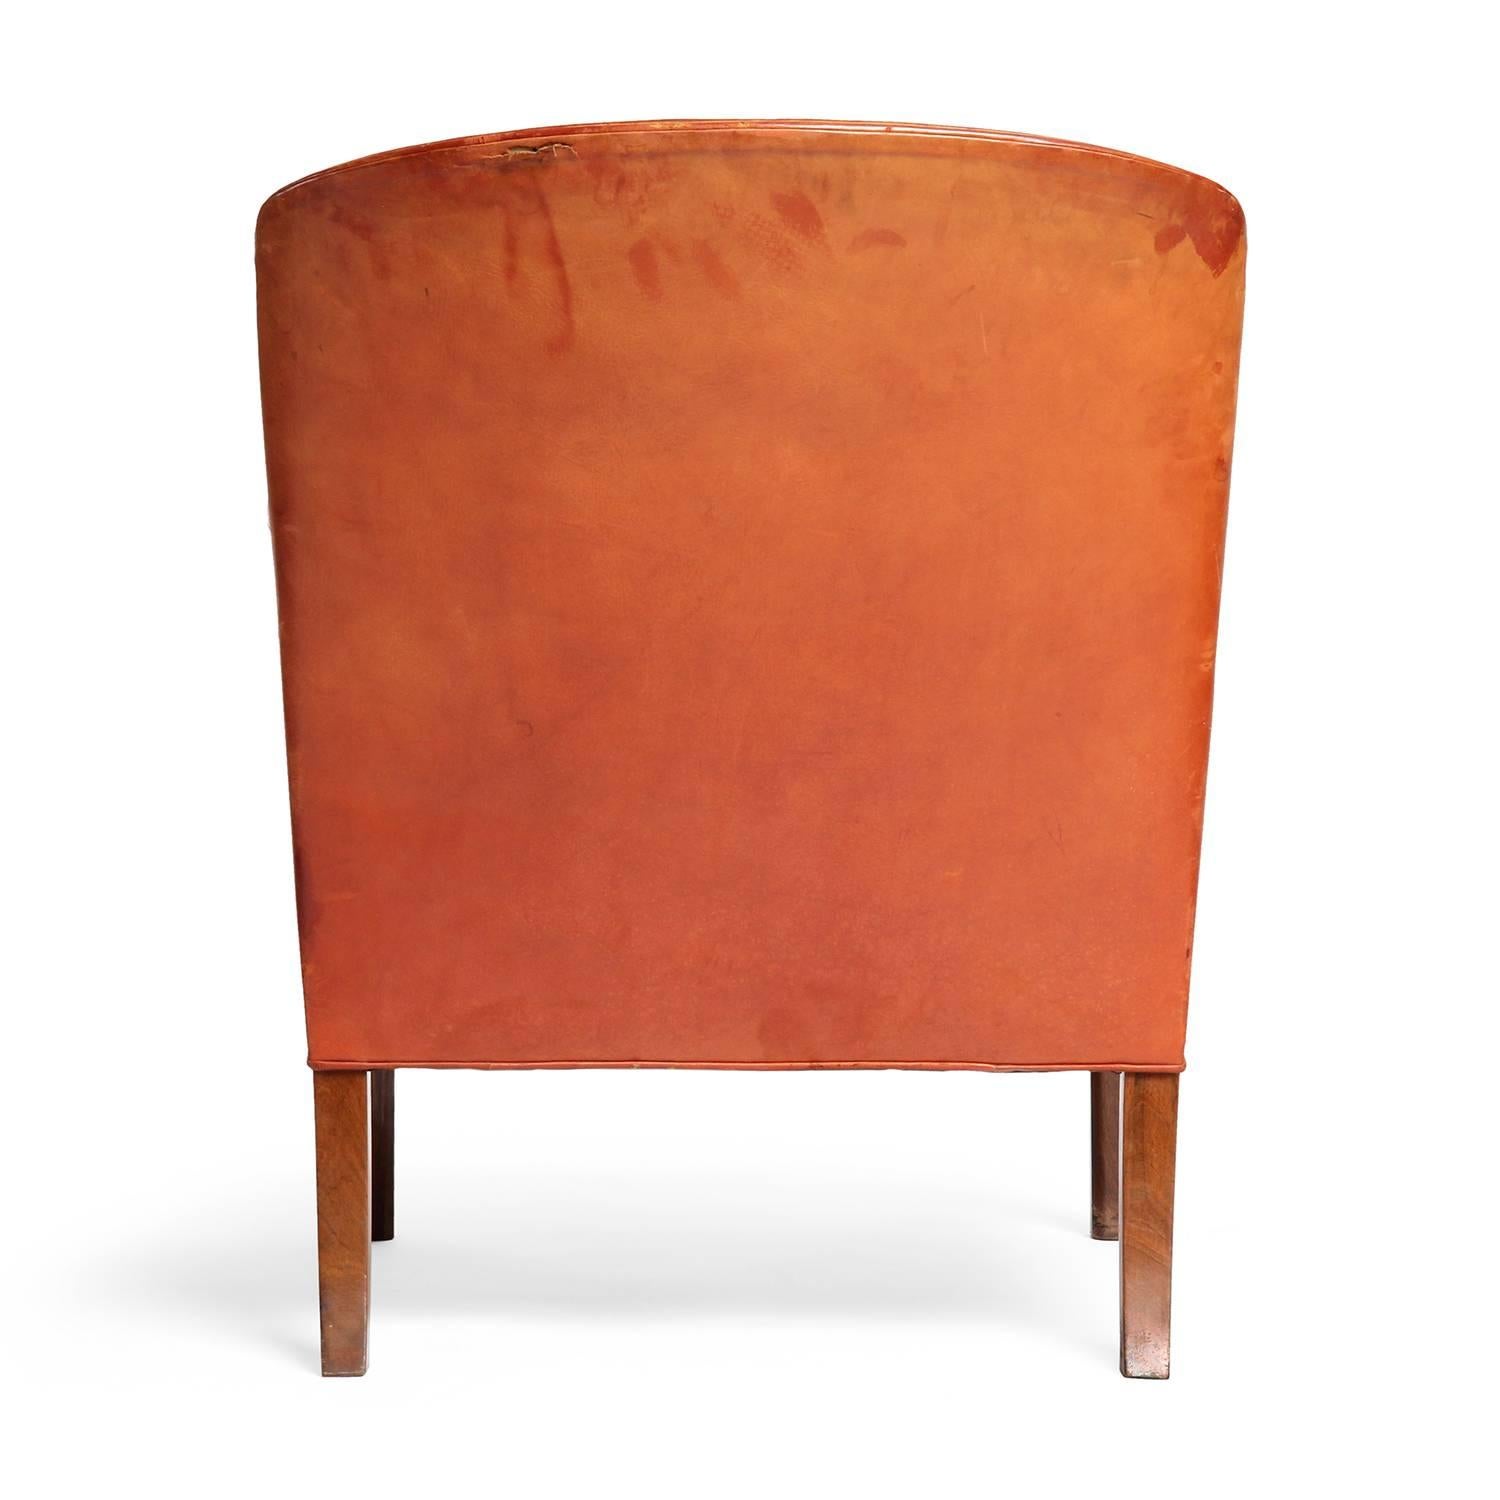 Danish Leather Lounge Chair by Ole Wanscher